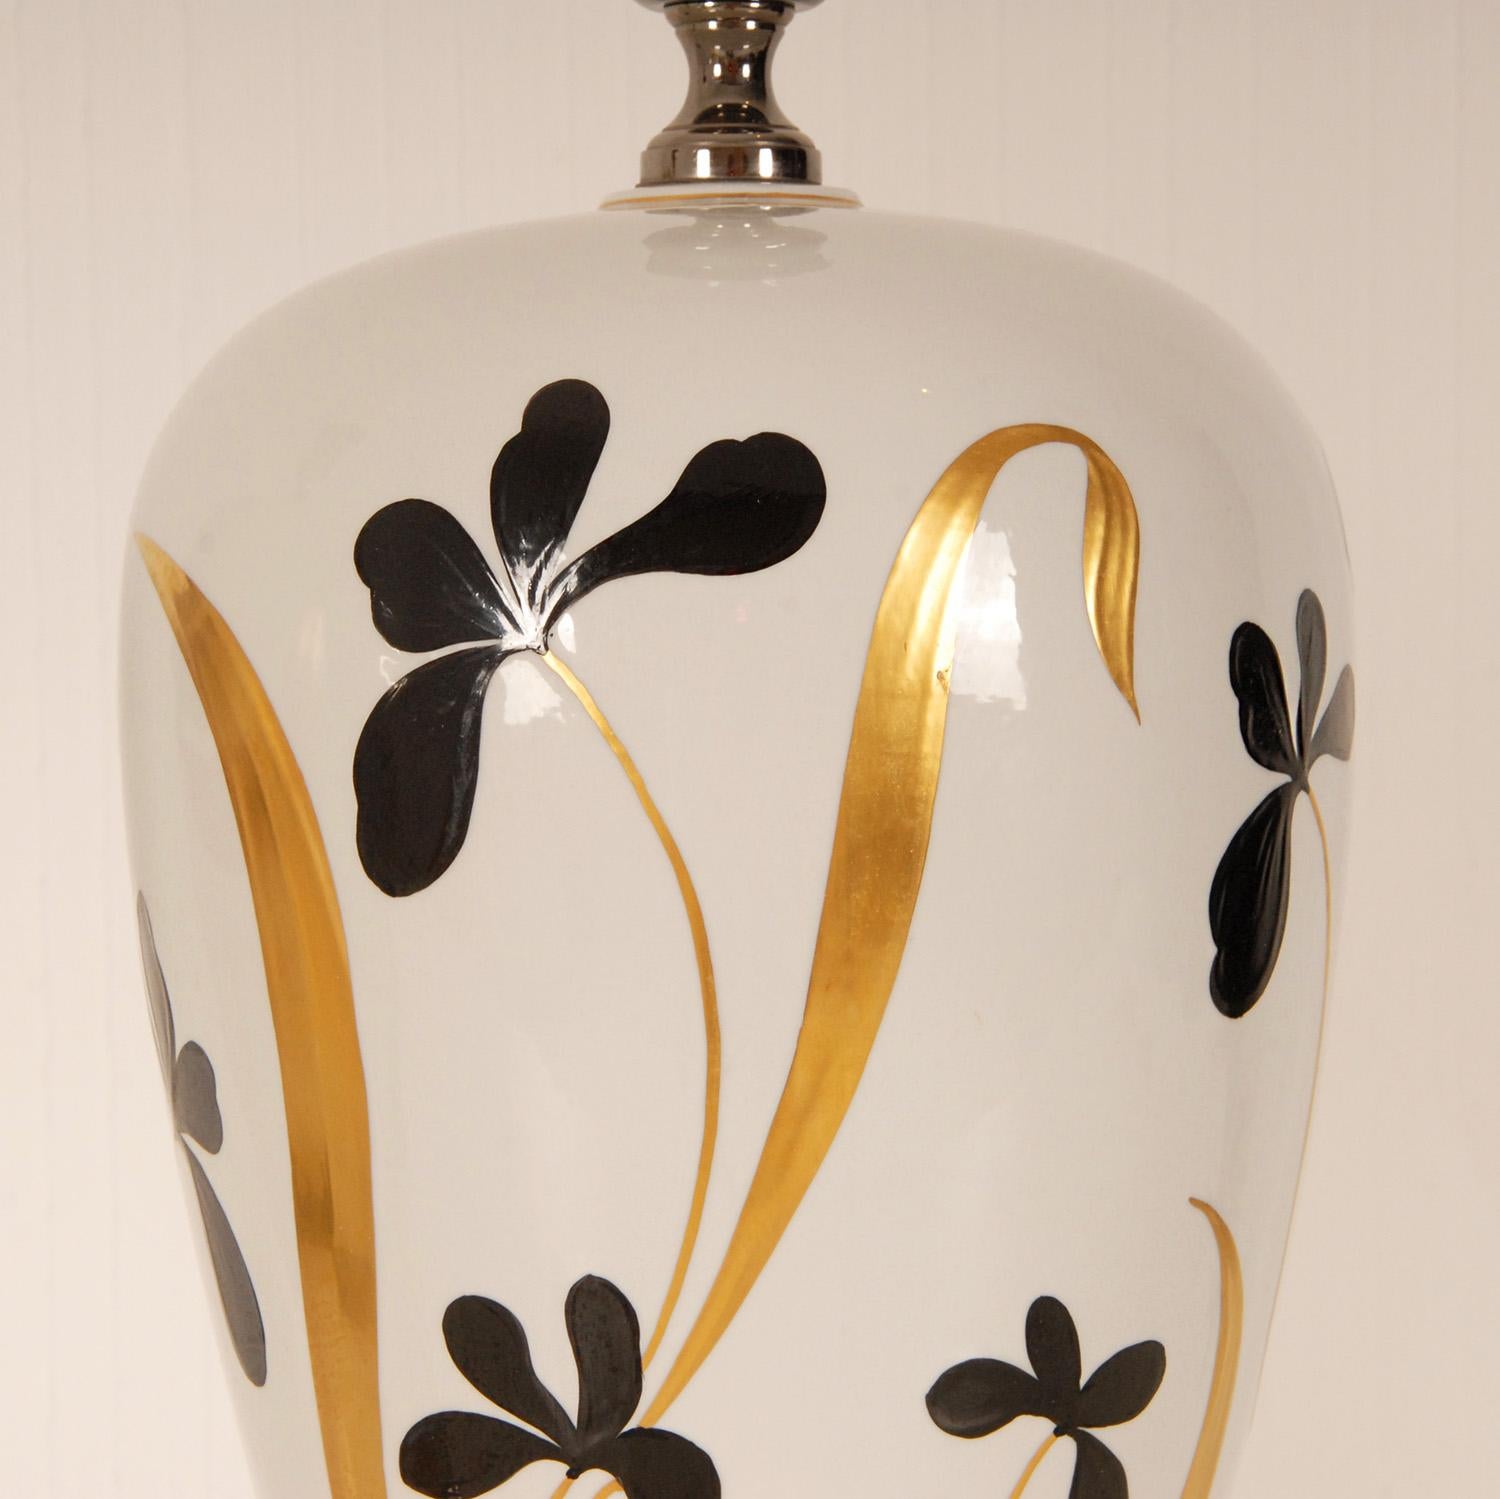 Vintage Italian Ceramic Porcelain Vase Table lamps
Material: Ceramic, Porcelain, fabric
Style: Vintage, Modernist, Oriental, Italian, Modern, Mid Century
Design: Italy Manifacture Artistica
Technique: Hand crafted and painted
Color: White, black,